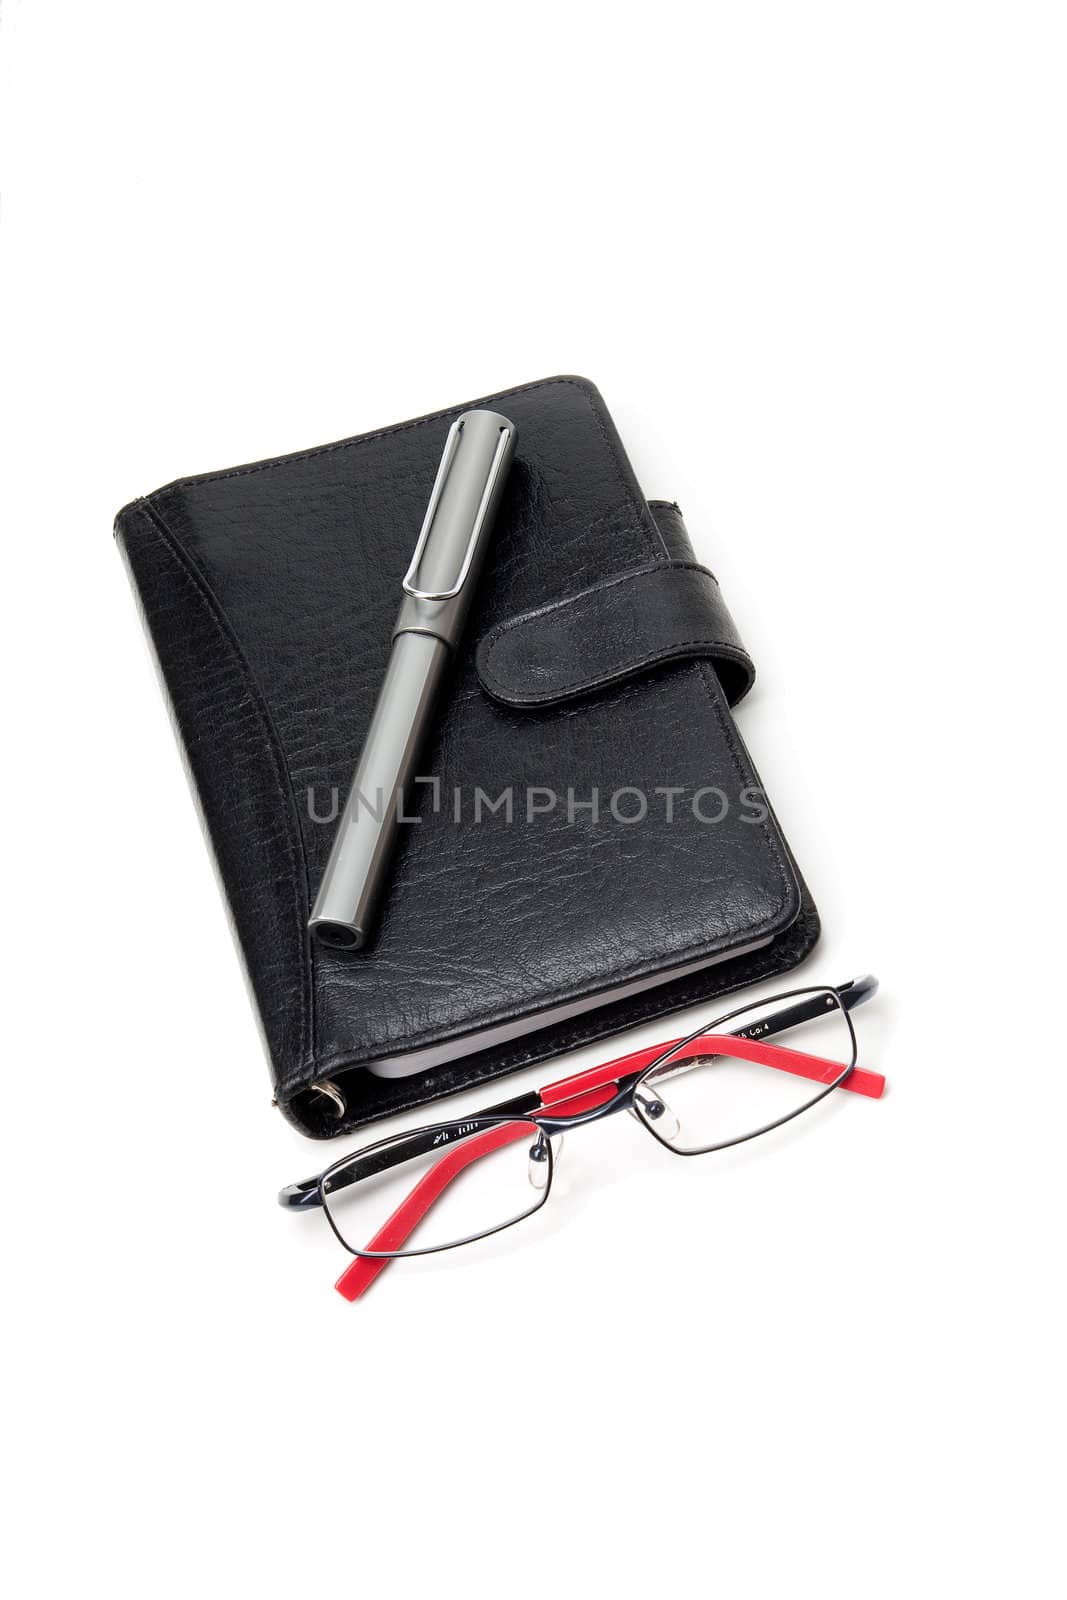 Closed Black Planner, with a silver pen on top, and a glasses on bottom. On white.